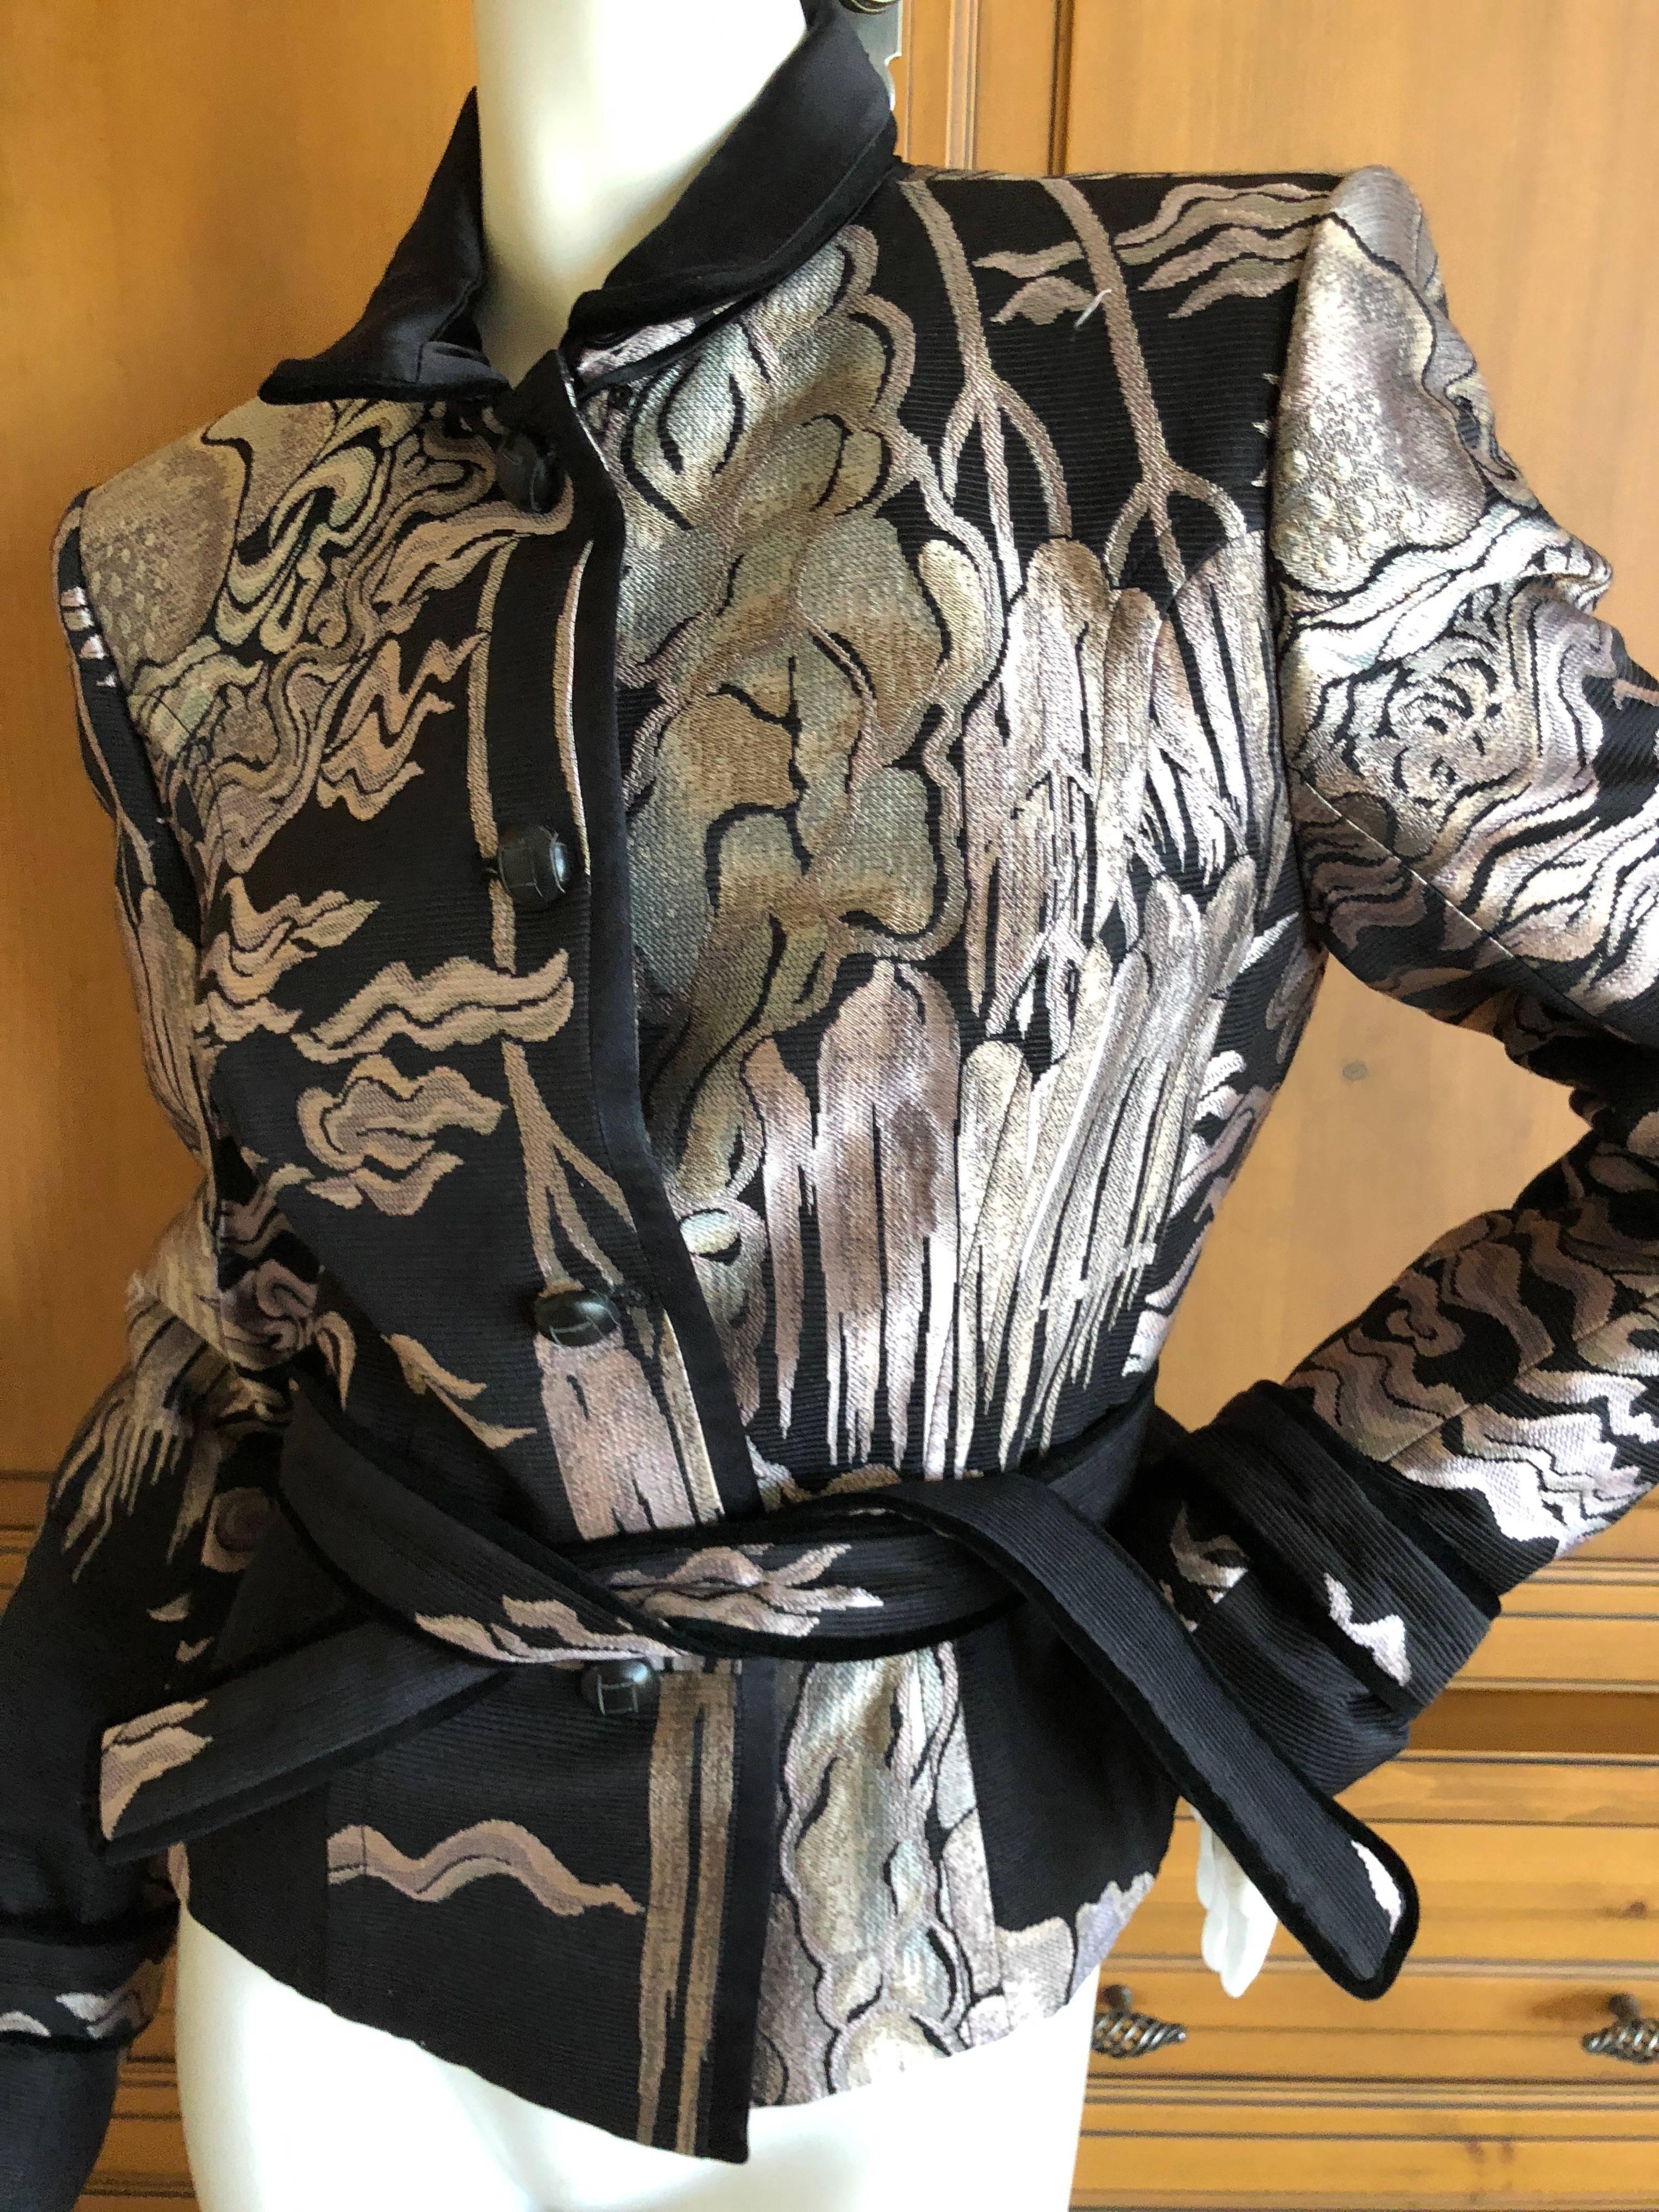 Yves Saint Laurent by Tom Ford Fall 2004 Chinoiserie Jacquard Jacket For Sale 3